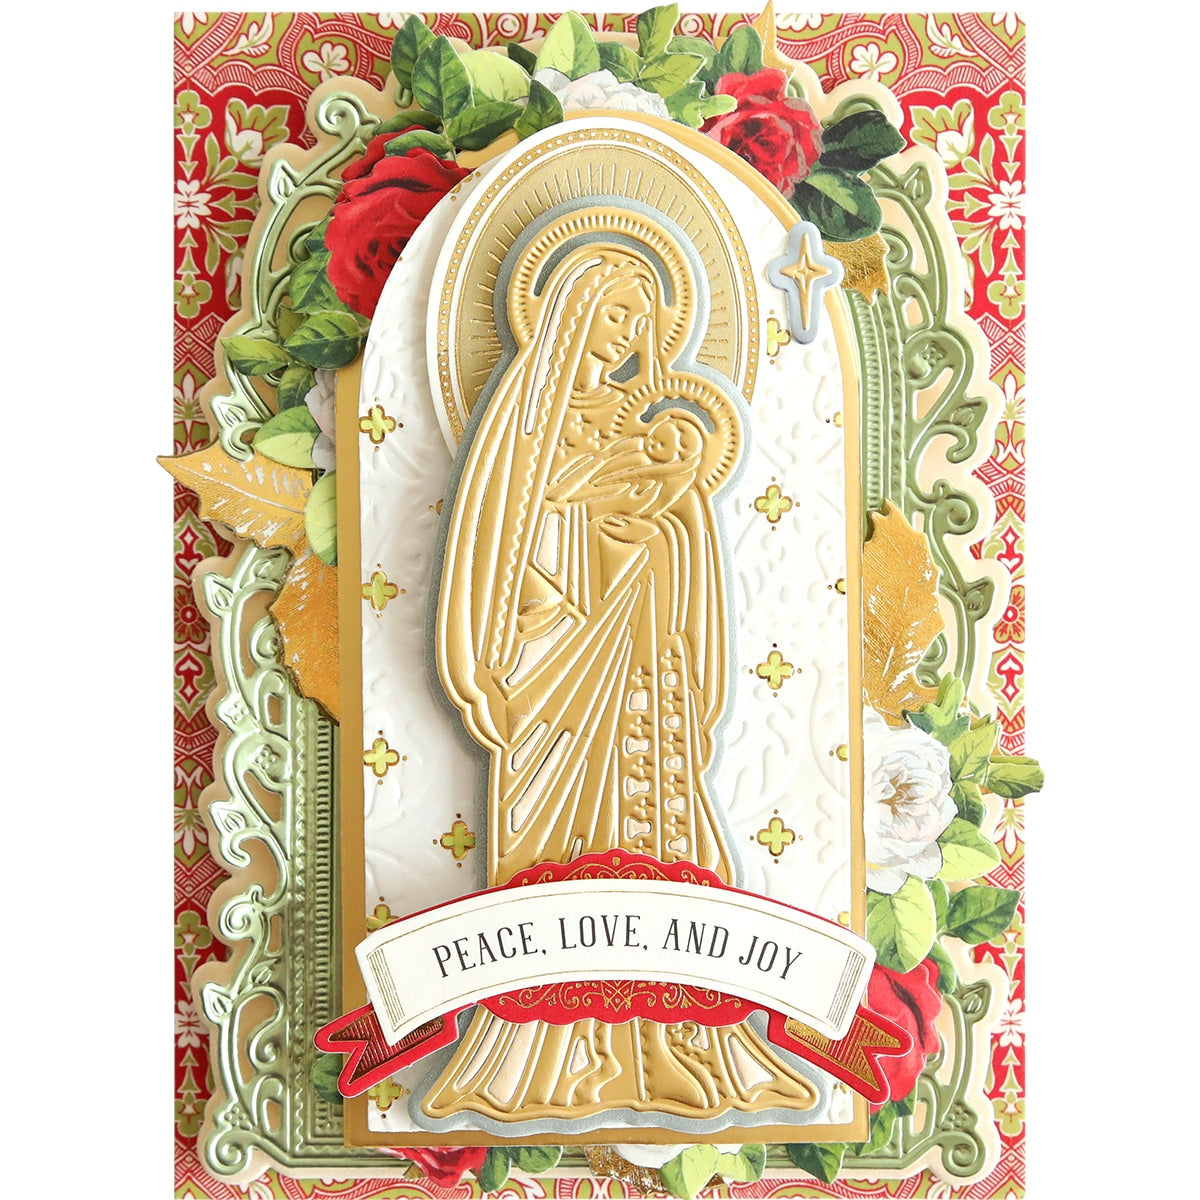 A card with the image of the Madonna & Child Die Set.